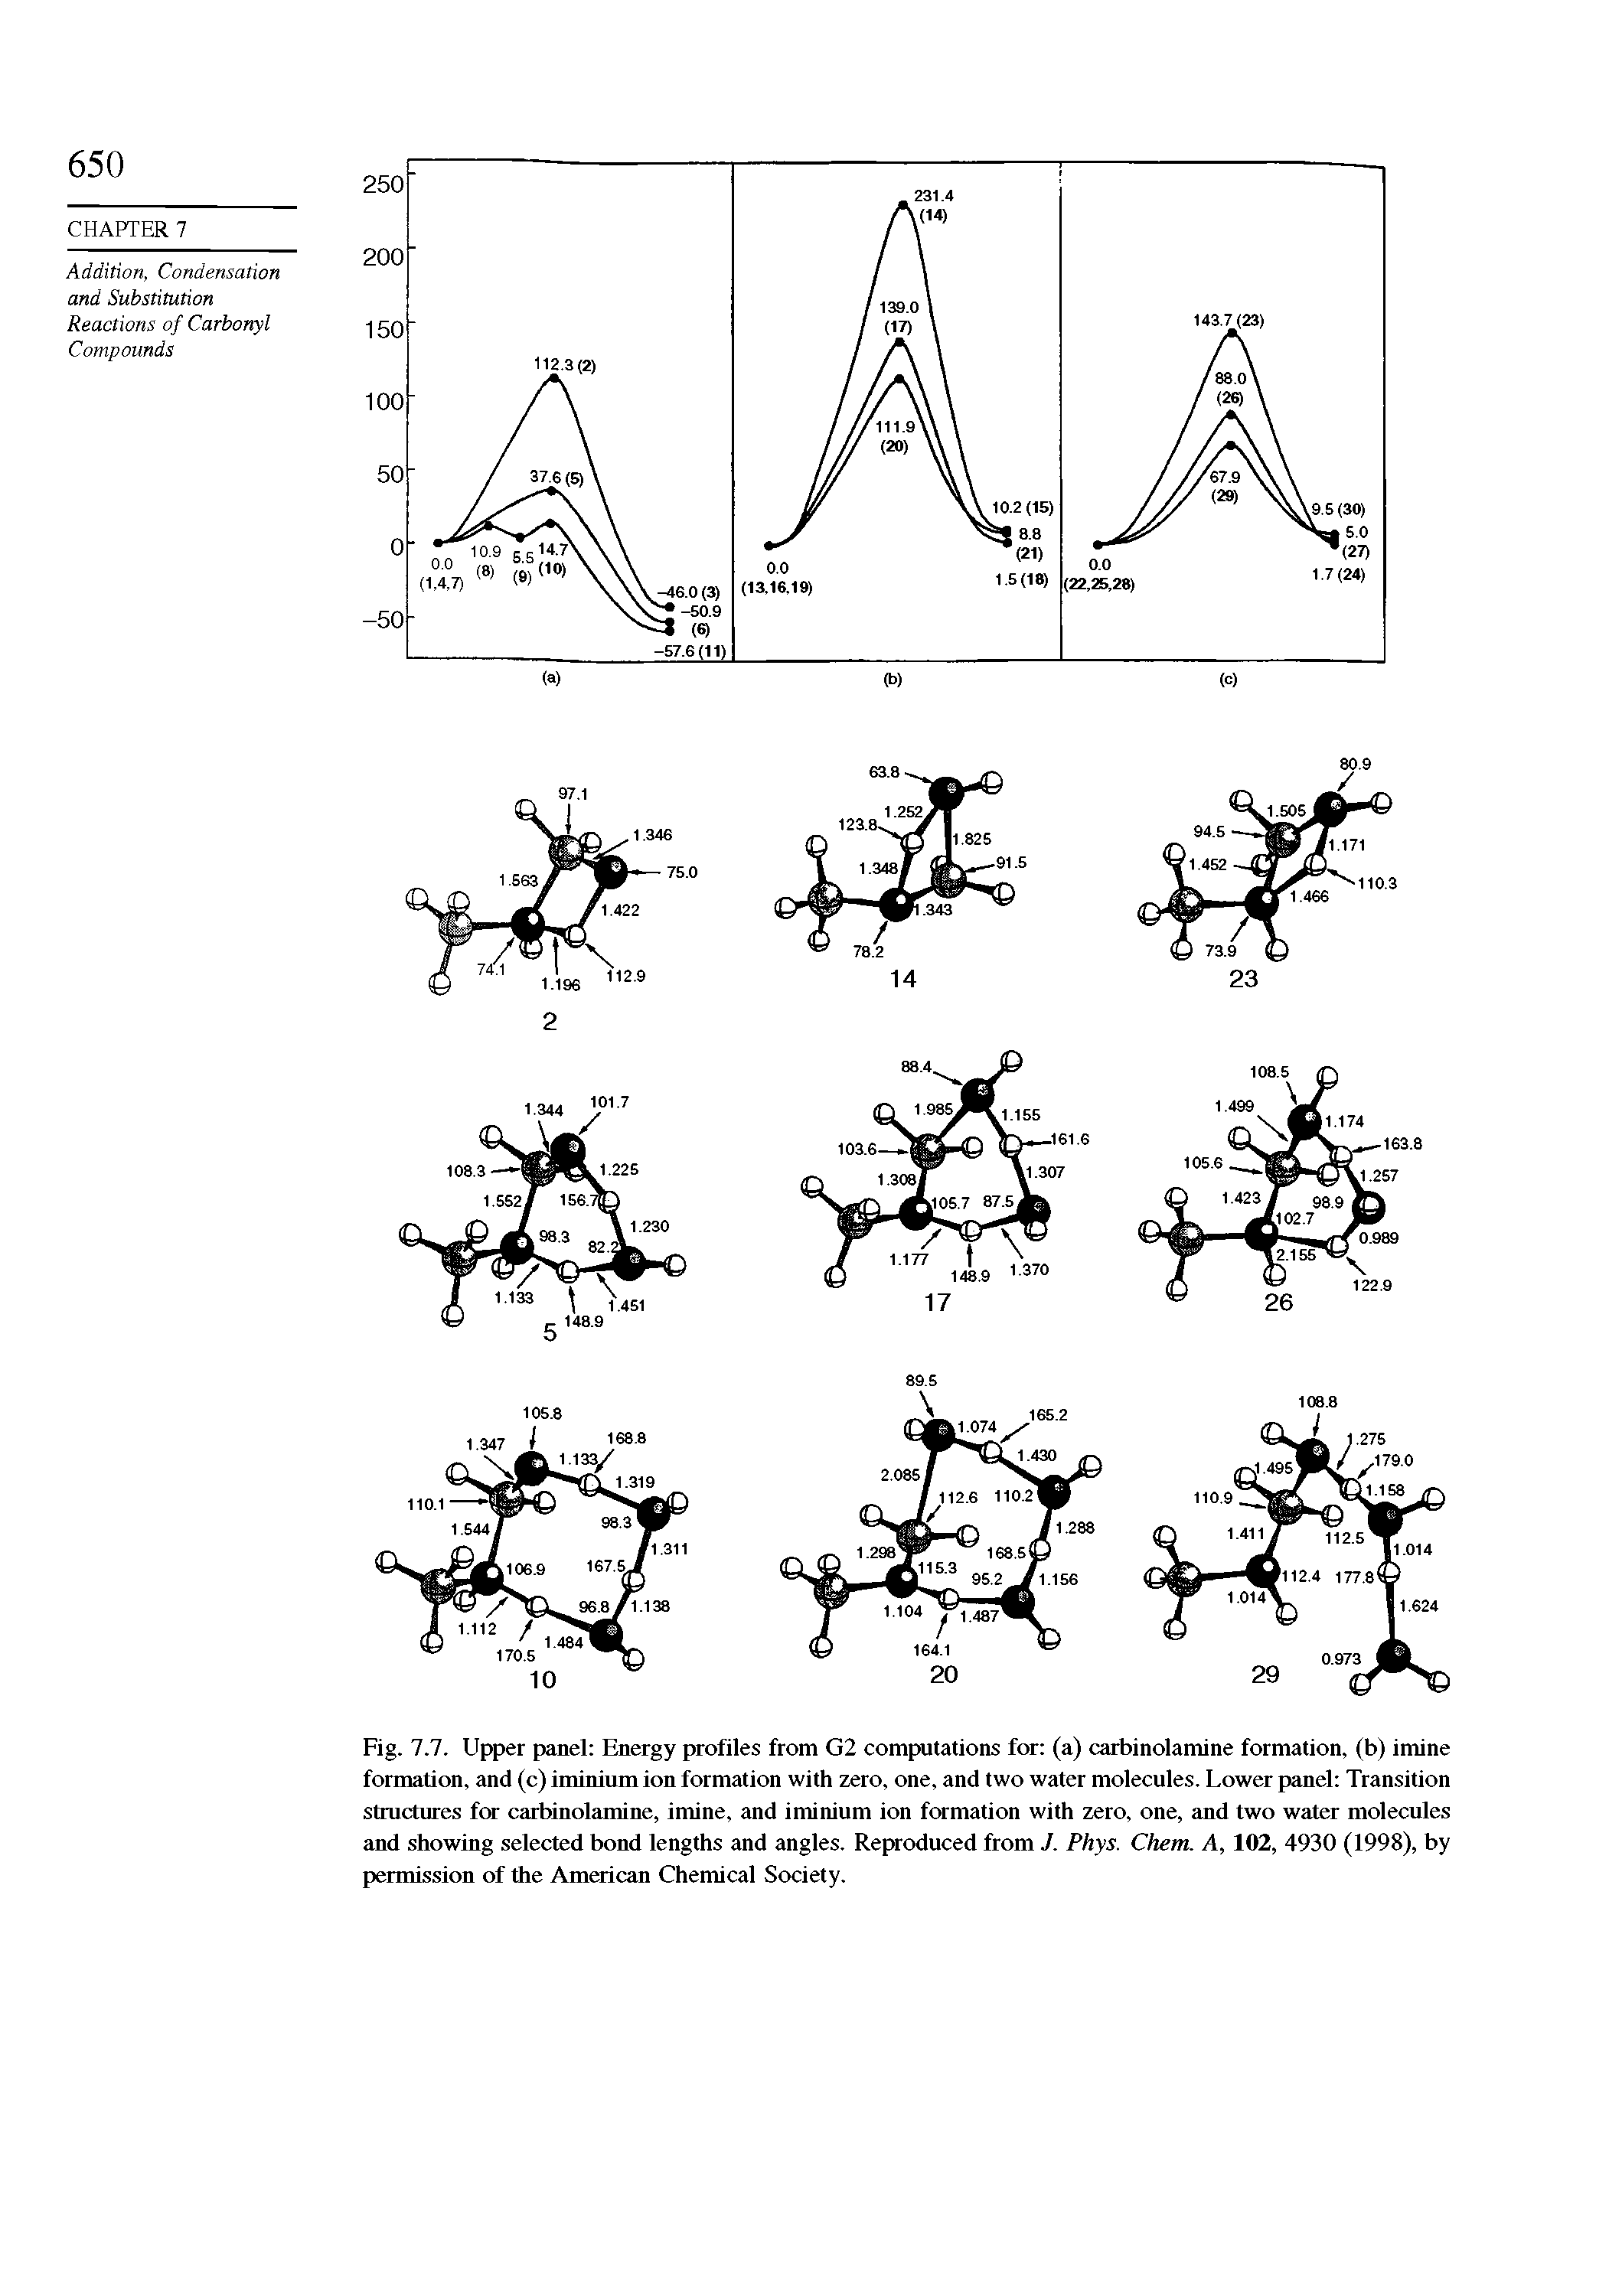 Fig. 7.7. Upper panel Energy profiles from G2 computations for (a) carbinolamine formation, (b) imine formation, and (c) iminium ion formation with zero, one, and two water molecules. Lower panel Transition structures for carbinolamine, imine, and iminium ion formation with zero, one, and two water molecules and showing selected bond lengths and angles. Reproduced from J. Phys. Chem. A, 102, 4930 (1998), by permission of die American Chemical Society.